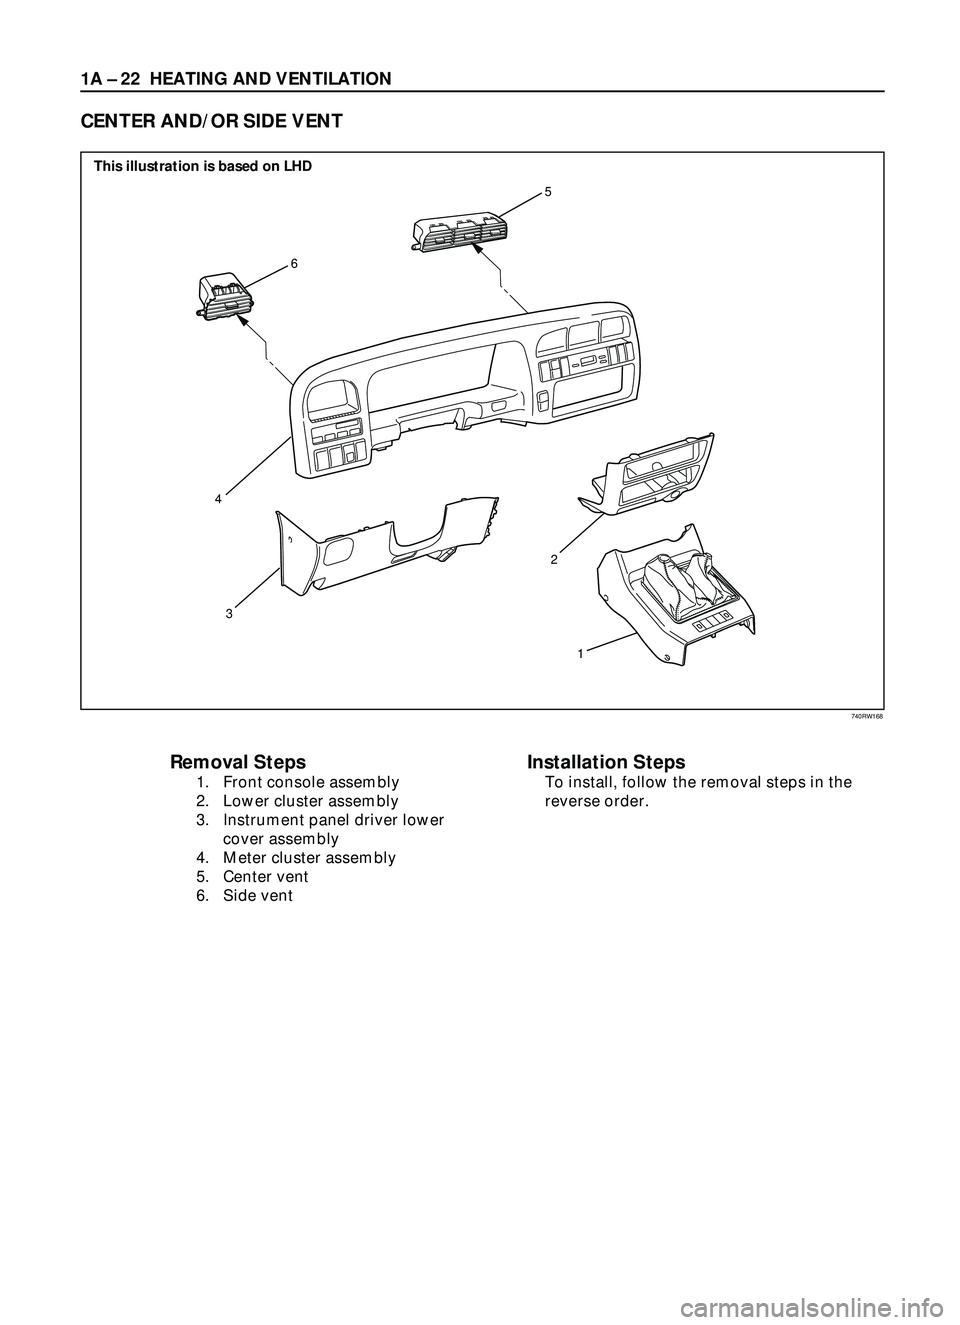 ISUZU TROOPER 1998  Service Repair Manual 1A Ð 22 HEATING AND VENTILATION
Removal Steps
1. Front console assembly
2. Lower cluster assembly
3. Instrument panel driver lower
cover assembly
4. Meter cluster assembly
5. Center vent
6. Side vent